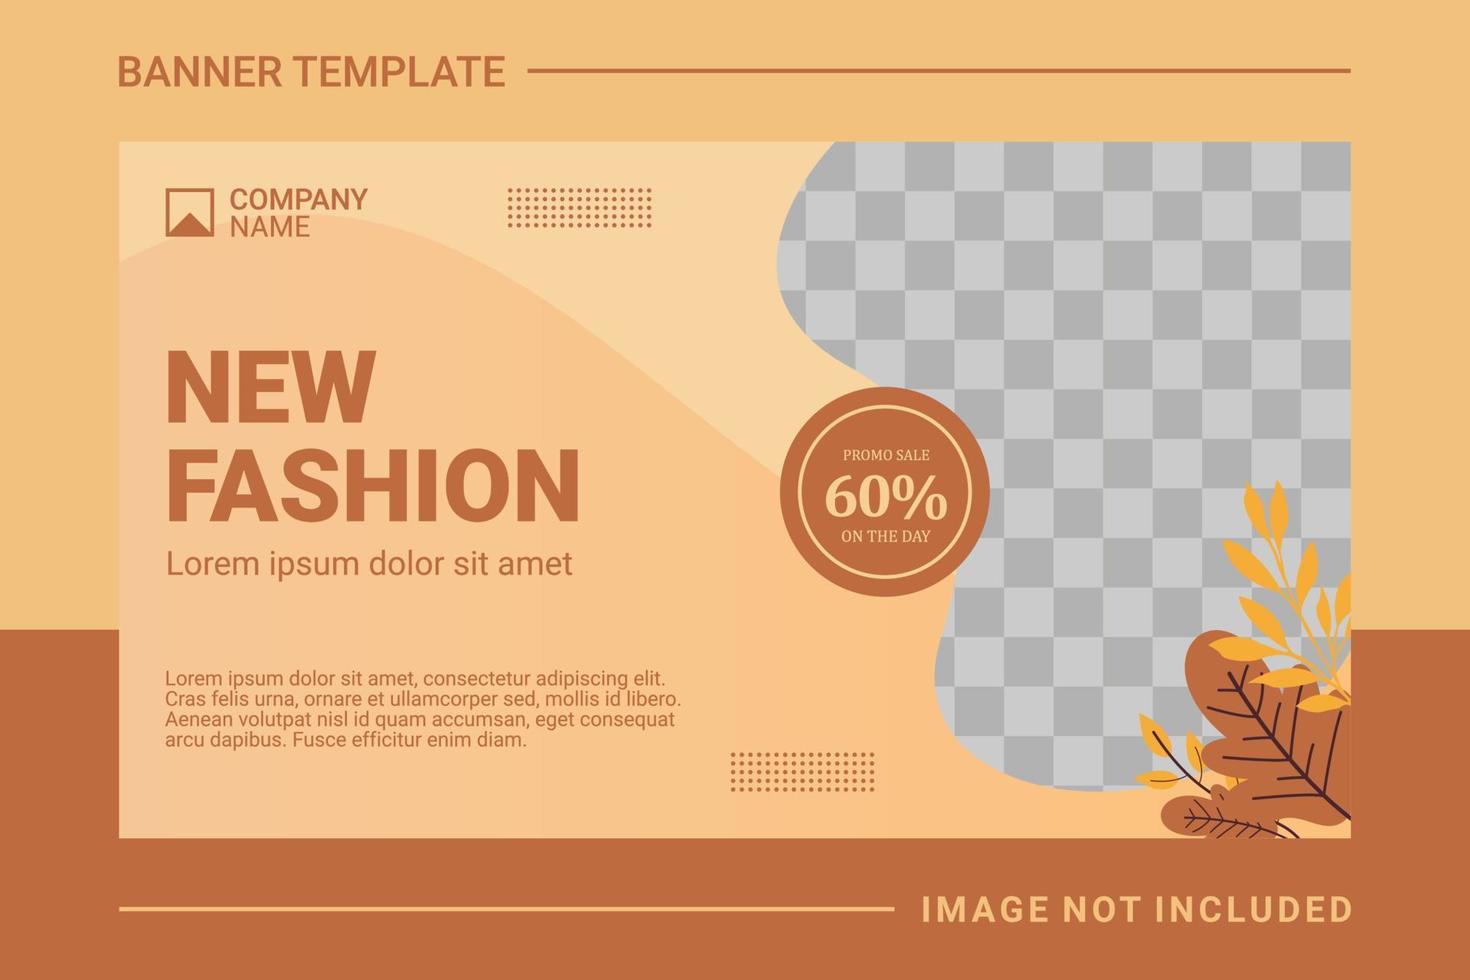 Fashion web banner and landing page template vector